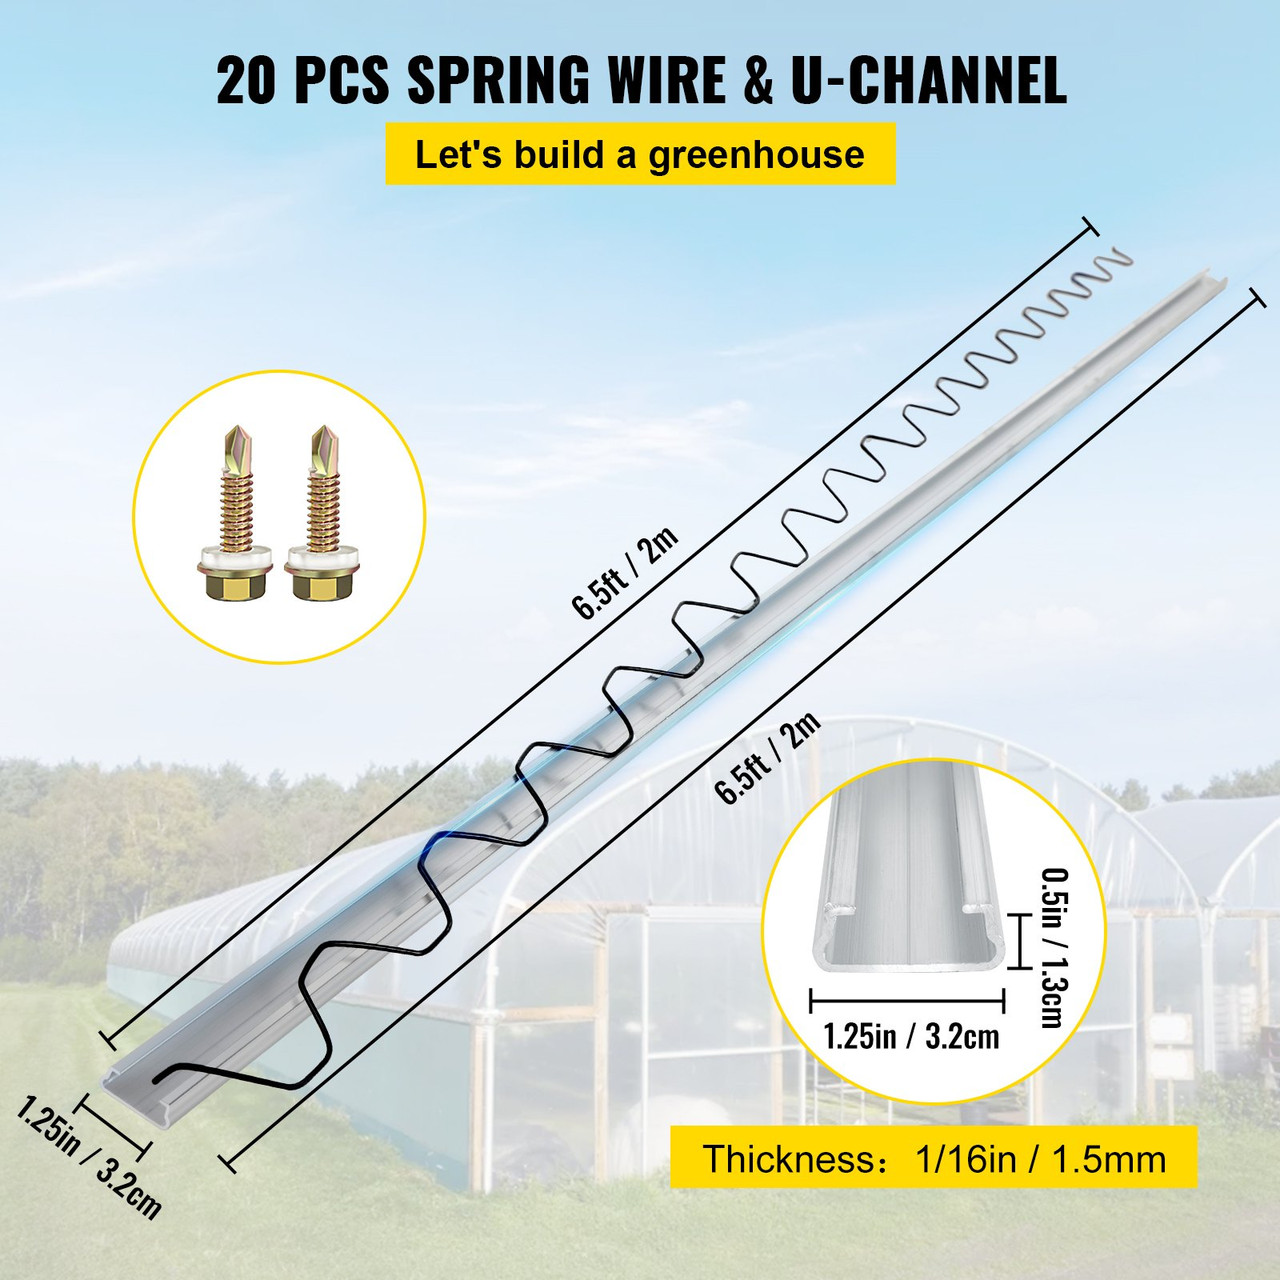 Spring Wire and Lock Channel,6.56ft Spring Lock & U-Channel Bundle for Greenhouse, 20 Packs PE Coated Spring Wire & Aluminum Alloy Channel, Plastic Poly Film or Shade Cloth Attachment w/Screws